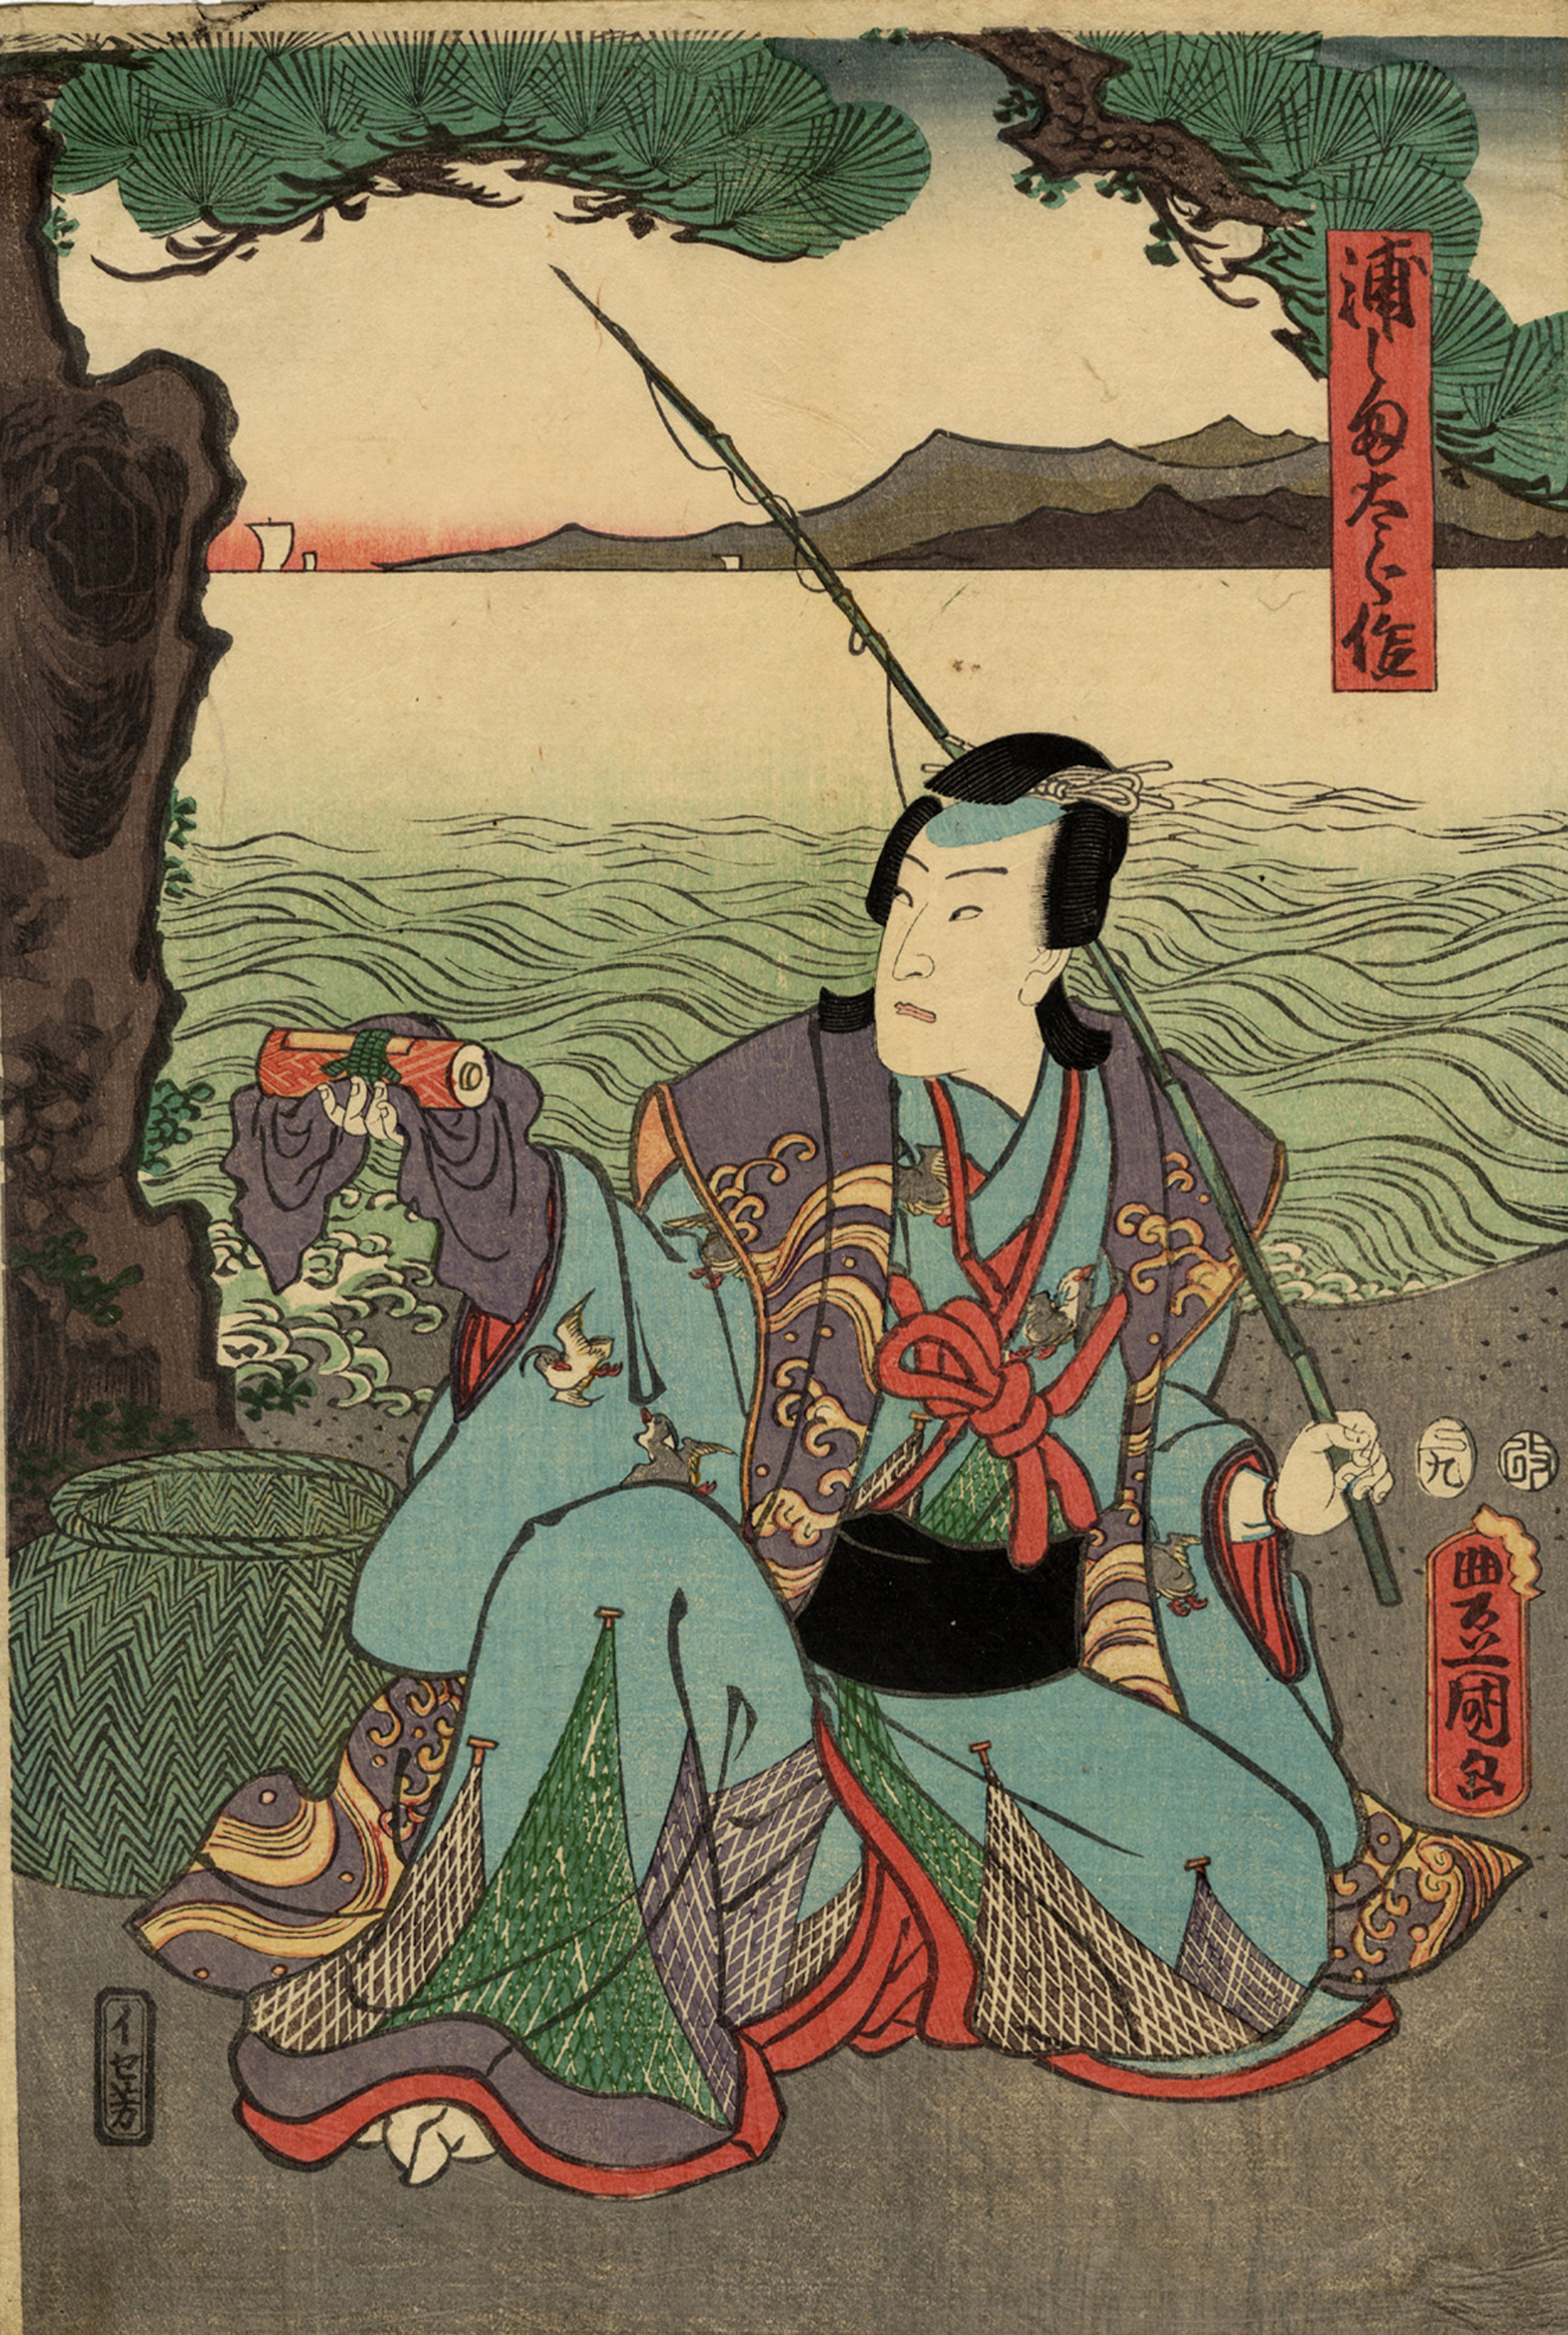 painting of an asian person holding a fishing pole and sushi